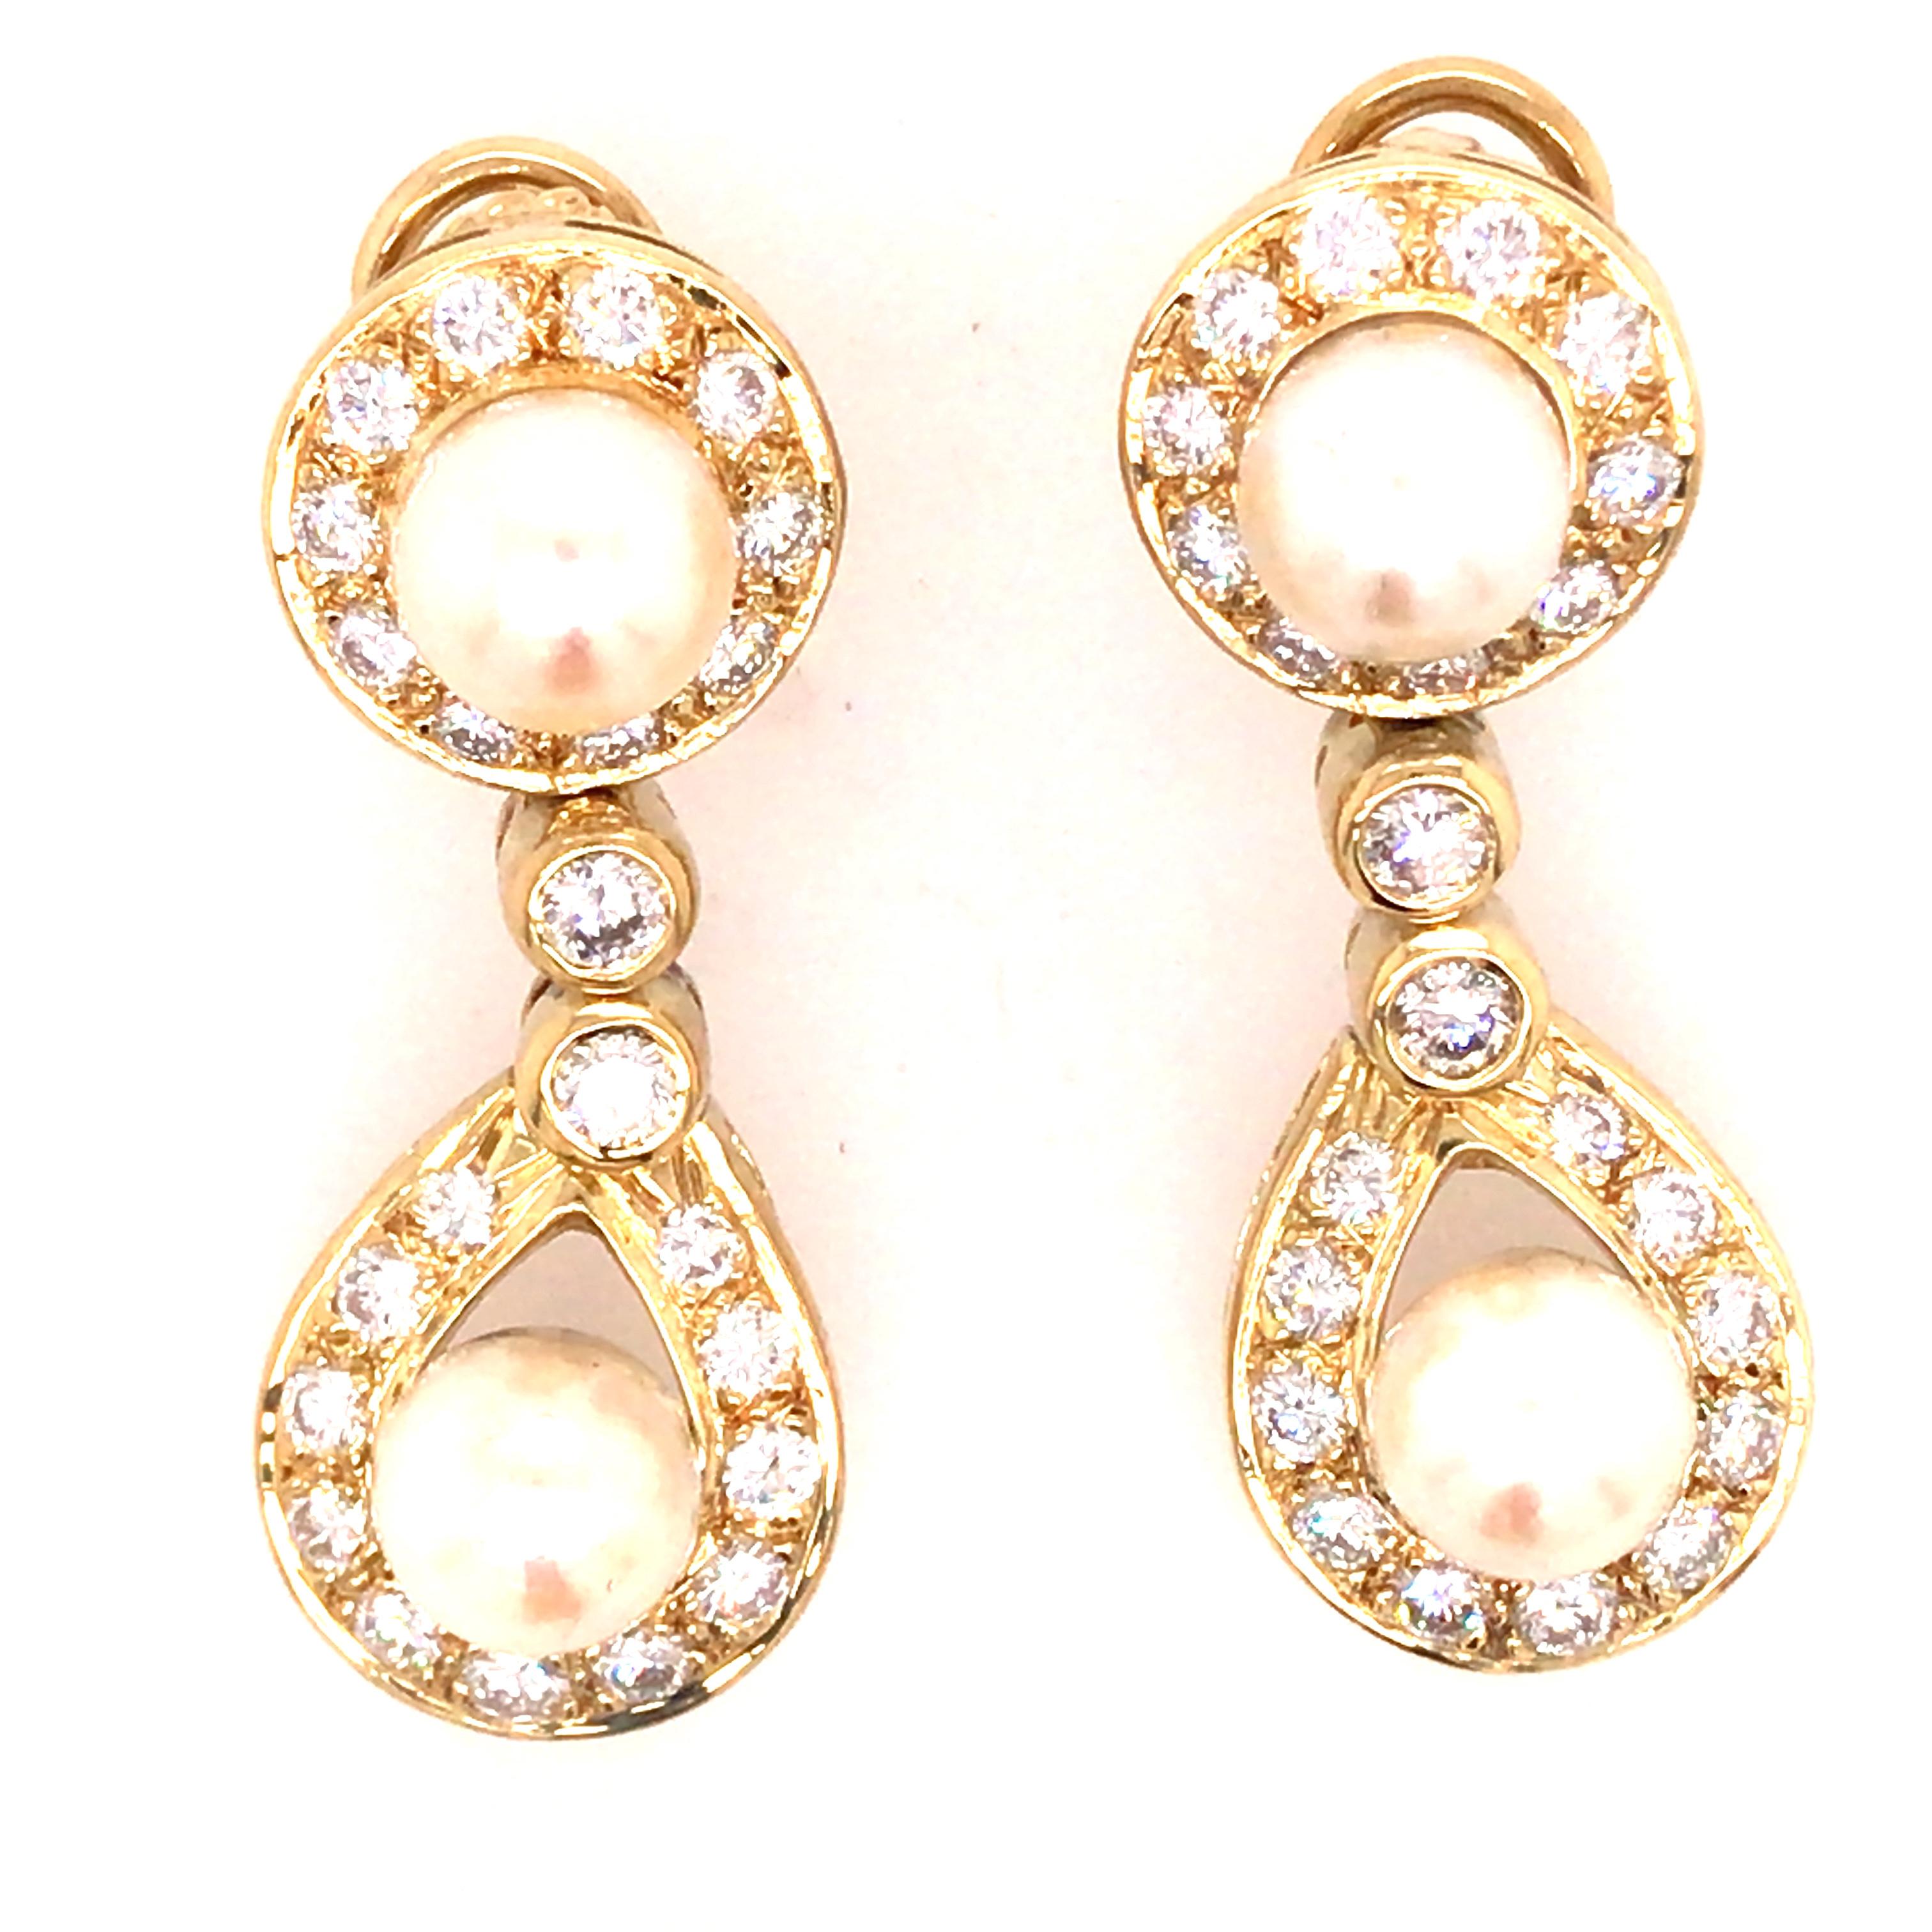 Round Diamond and Pearl Drop Earring in 18K Yellow Gold.  (46) Round Brilliant Cut Diamonds weighing approximately 2.50 carat total weight, G-H in color and VS-SI in clarity are expertly set.  The earrings measure 1 1/2 inch in length and 5/8 in